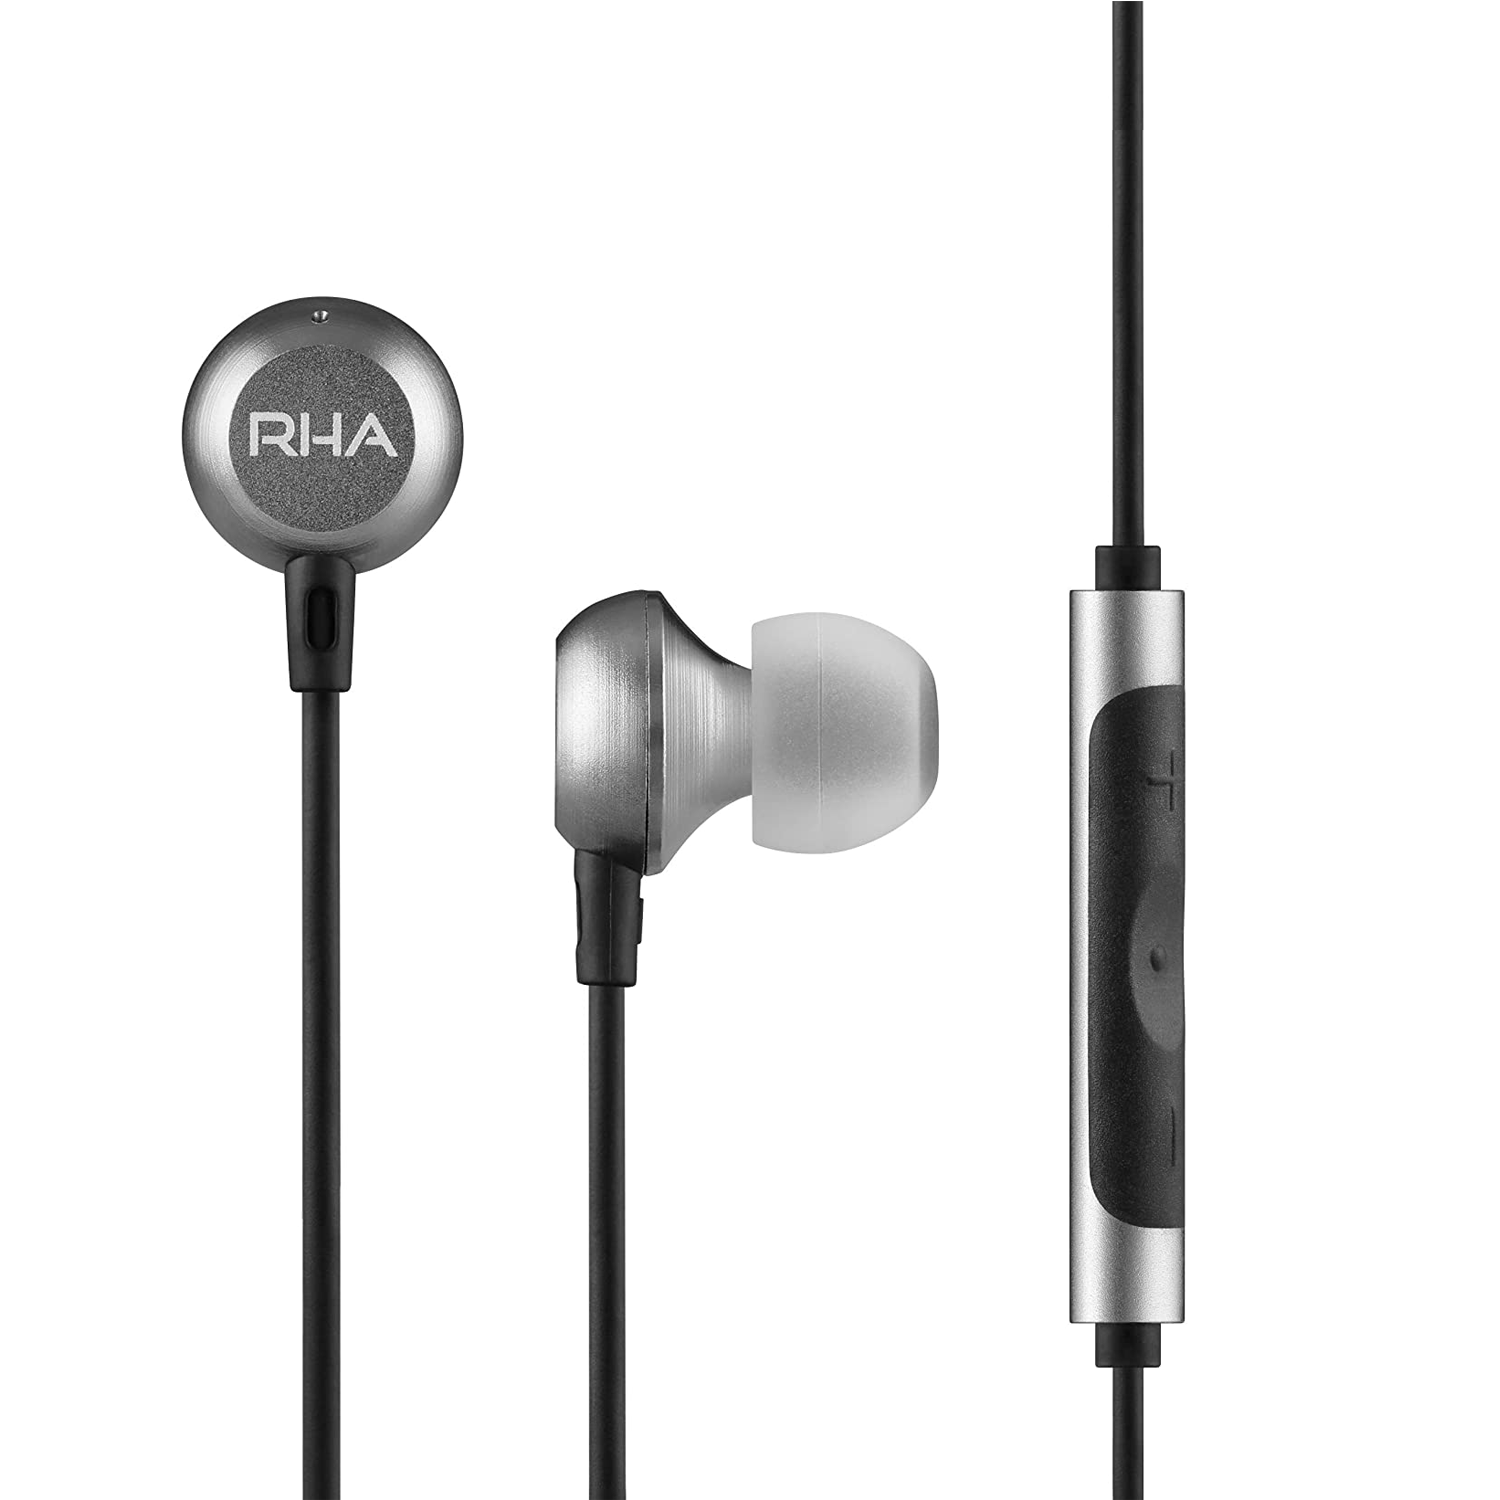 RHA MA650 Powerful Noise Isolating Aluminium in-Ear Headphones with Android Device Remote & Microphone